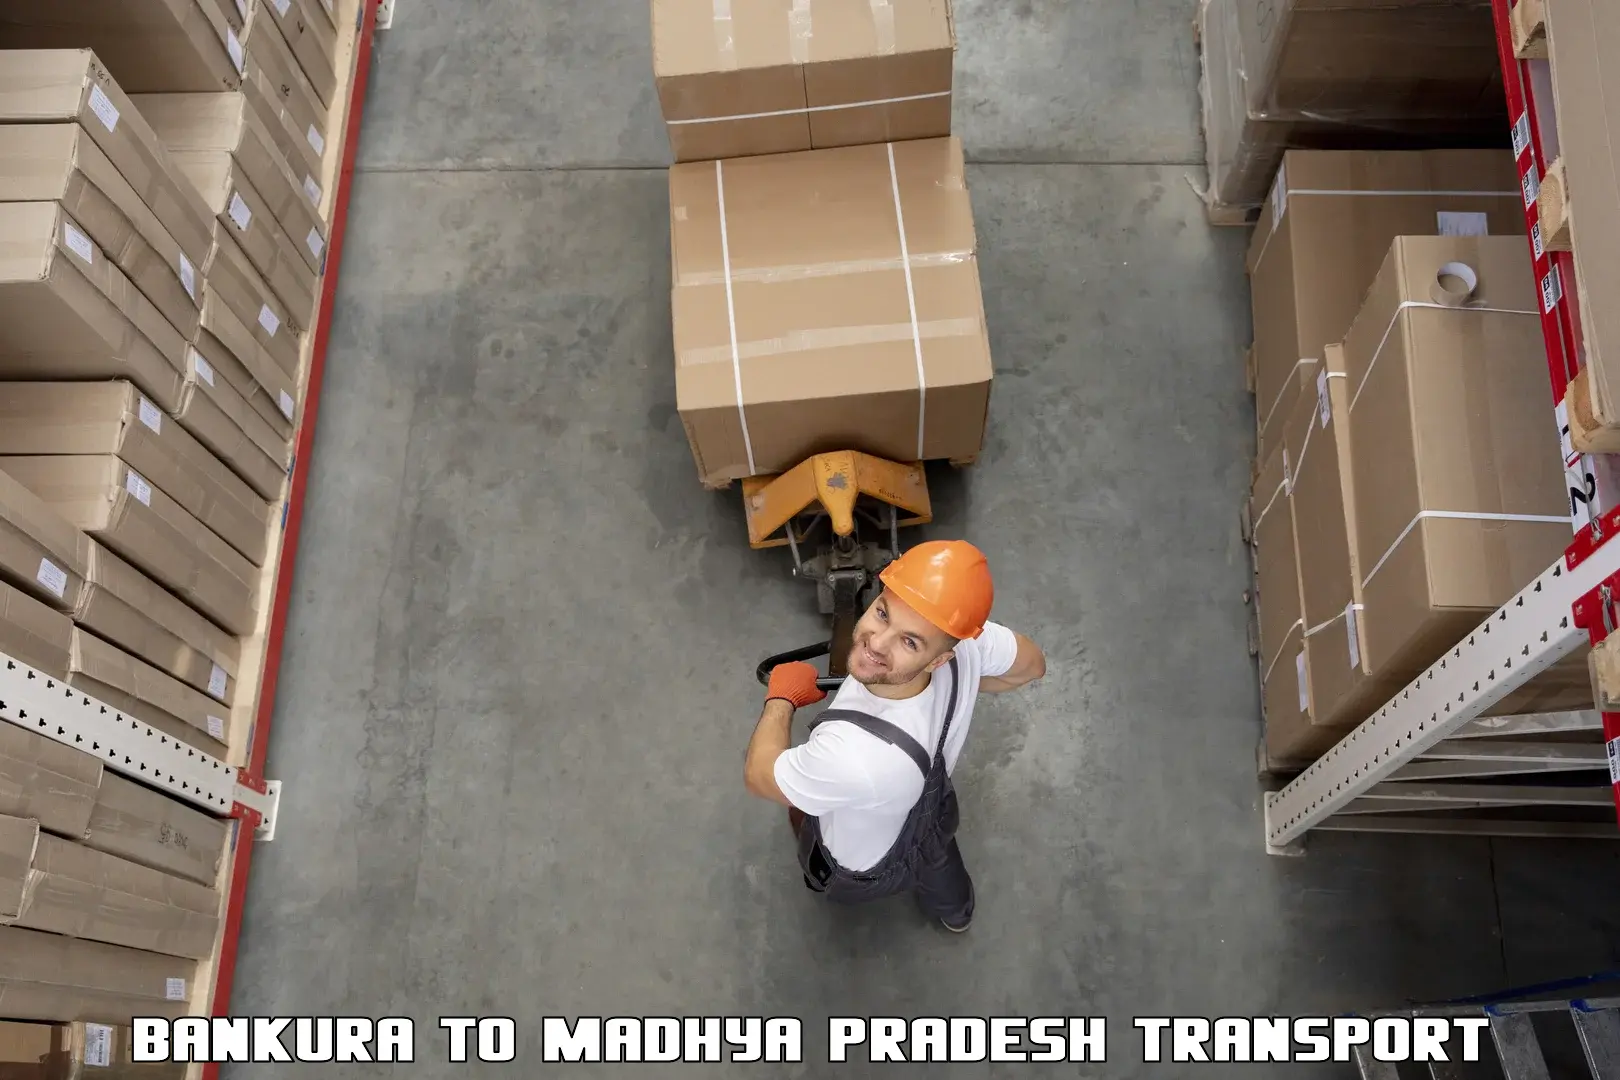 Container transport service Bankura to Shahdol